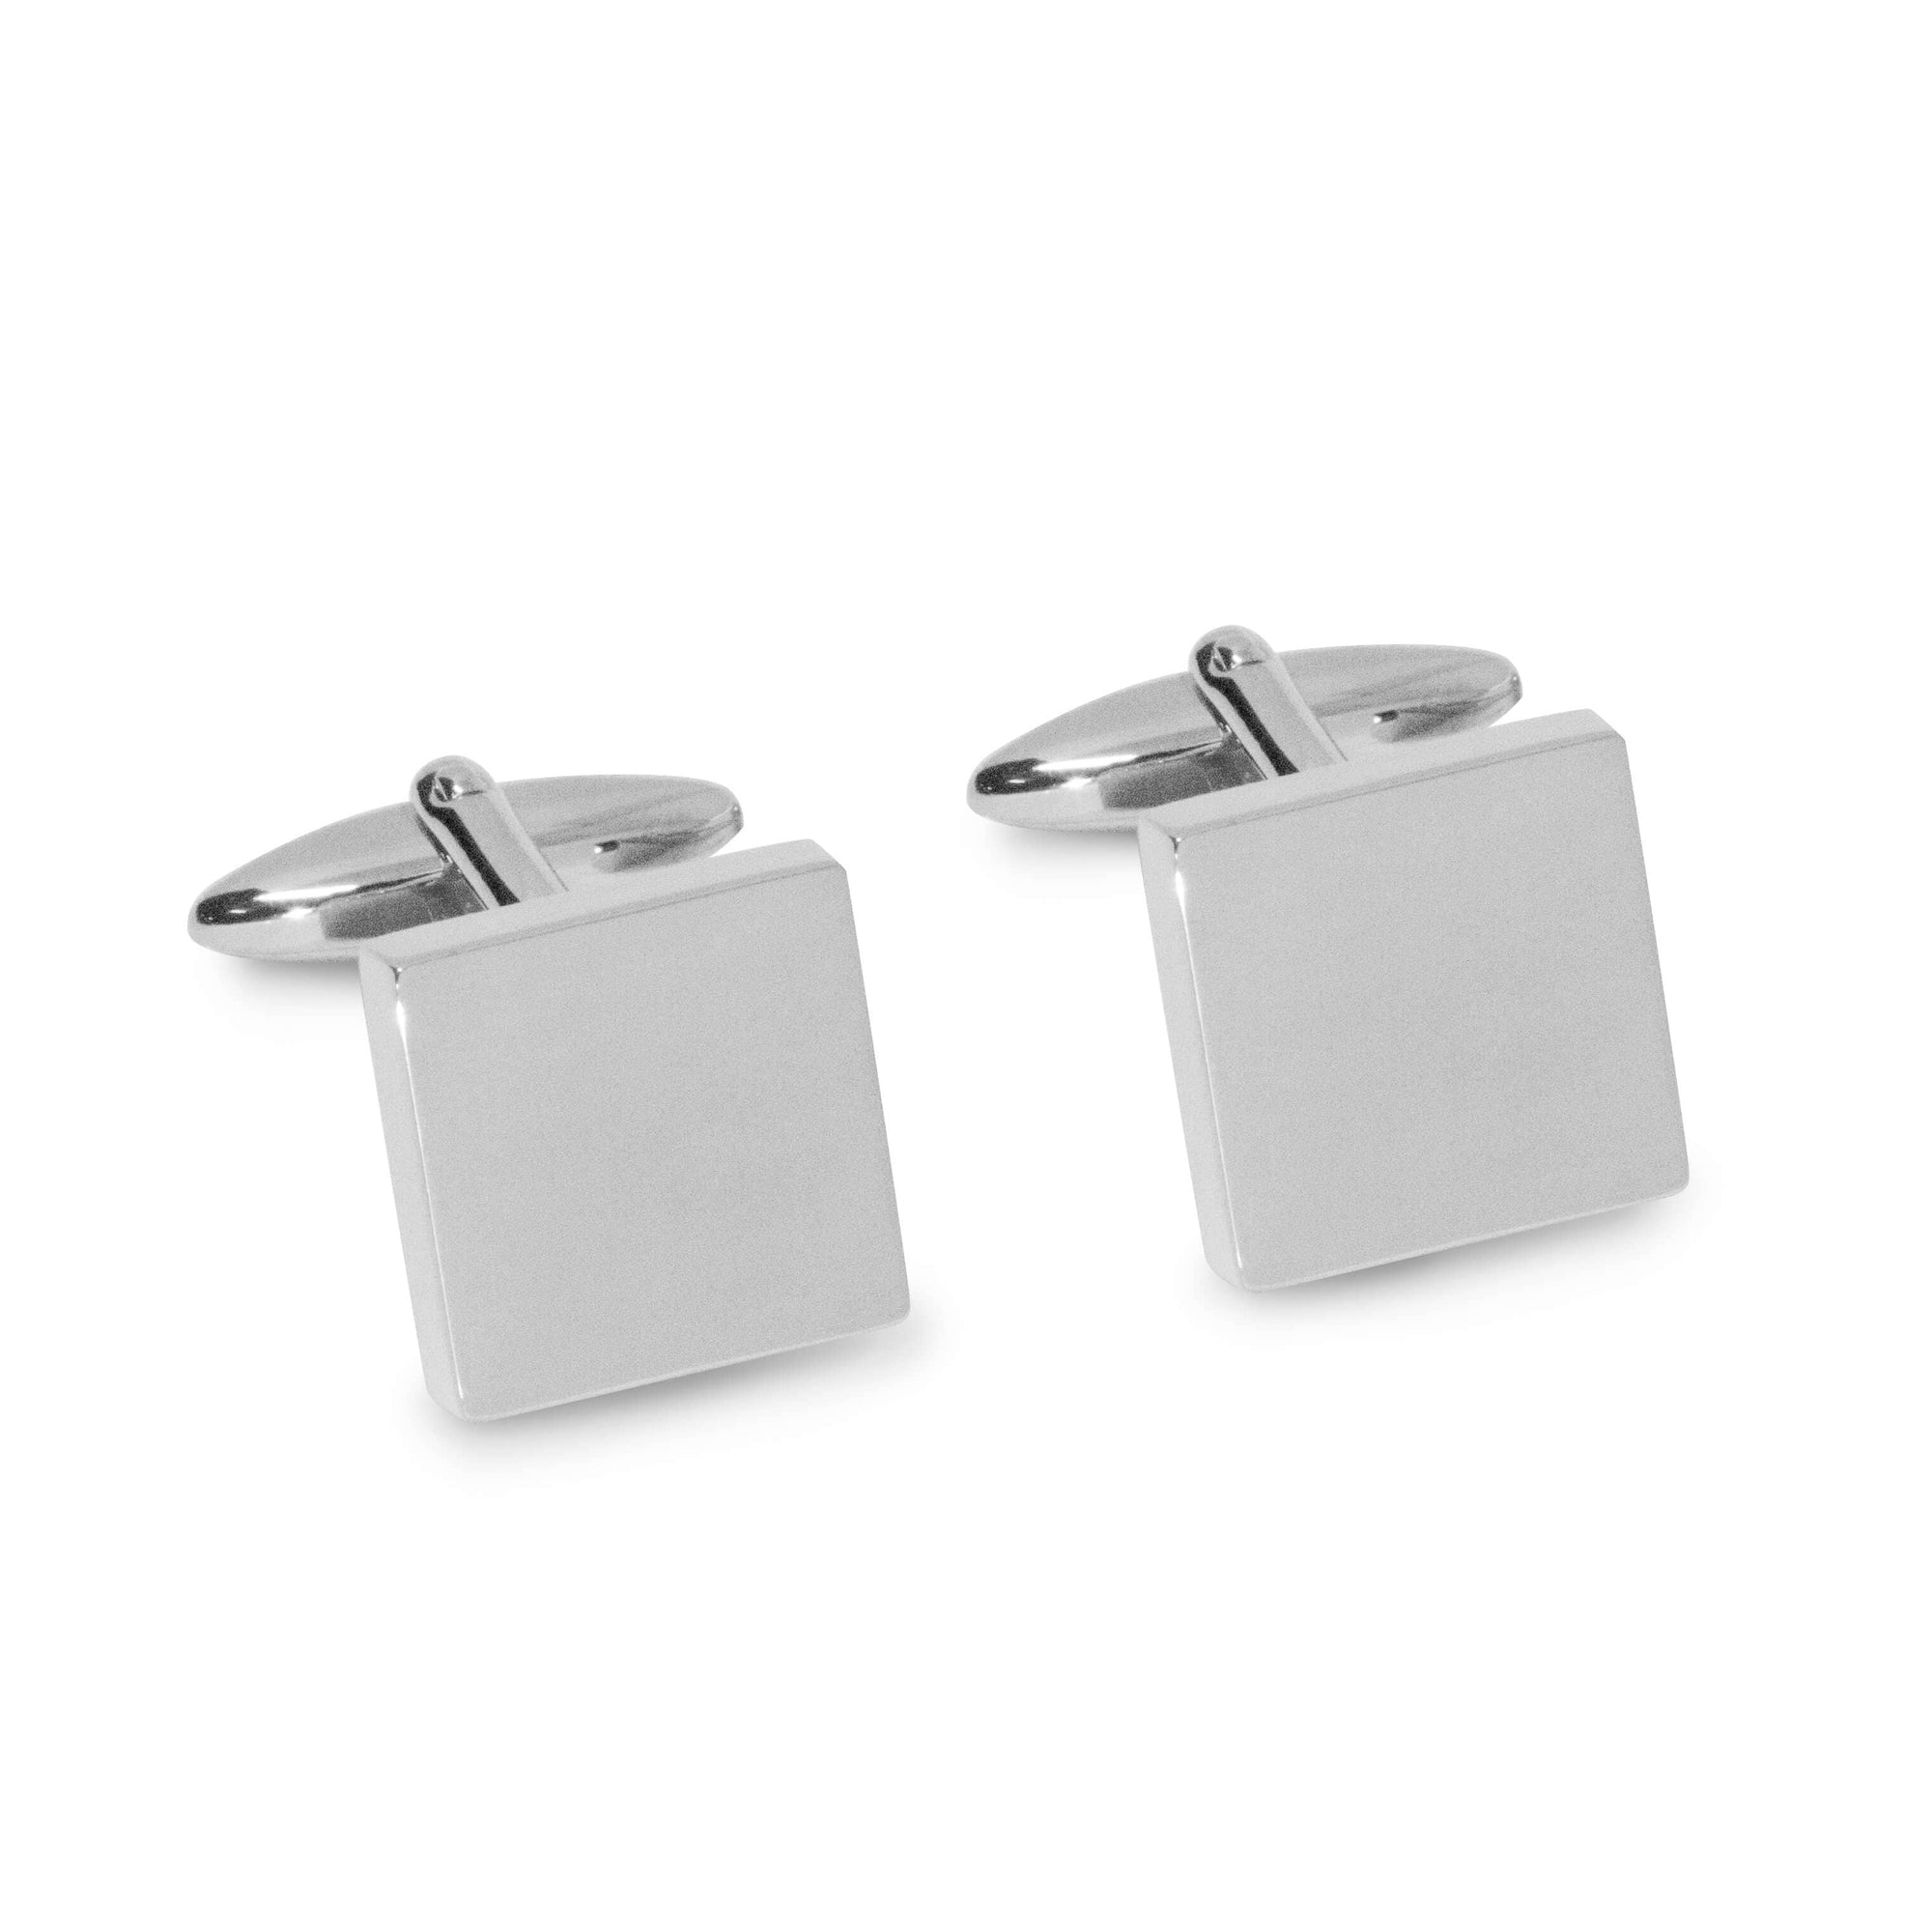 Engraving cufflinks:  Create Your Own